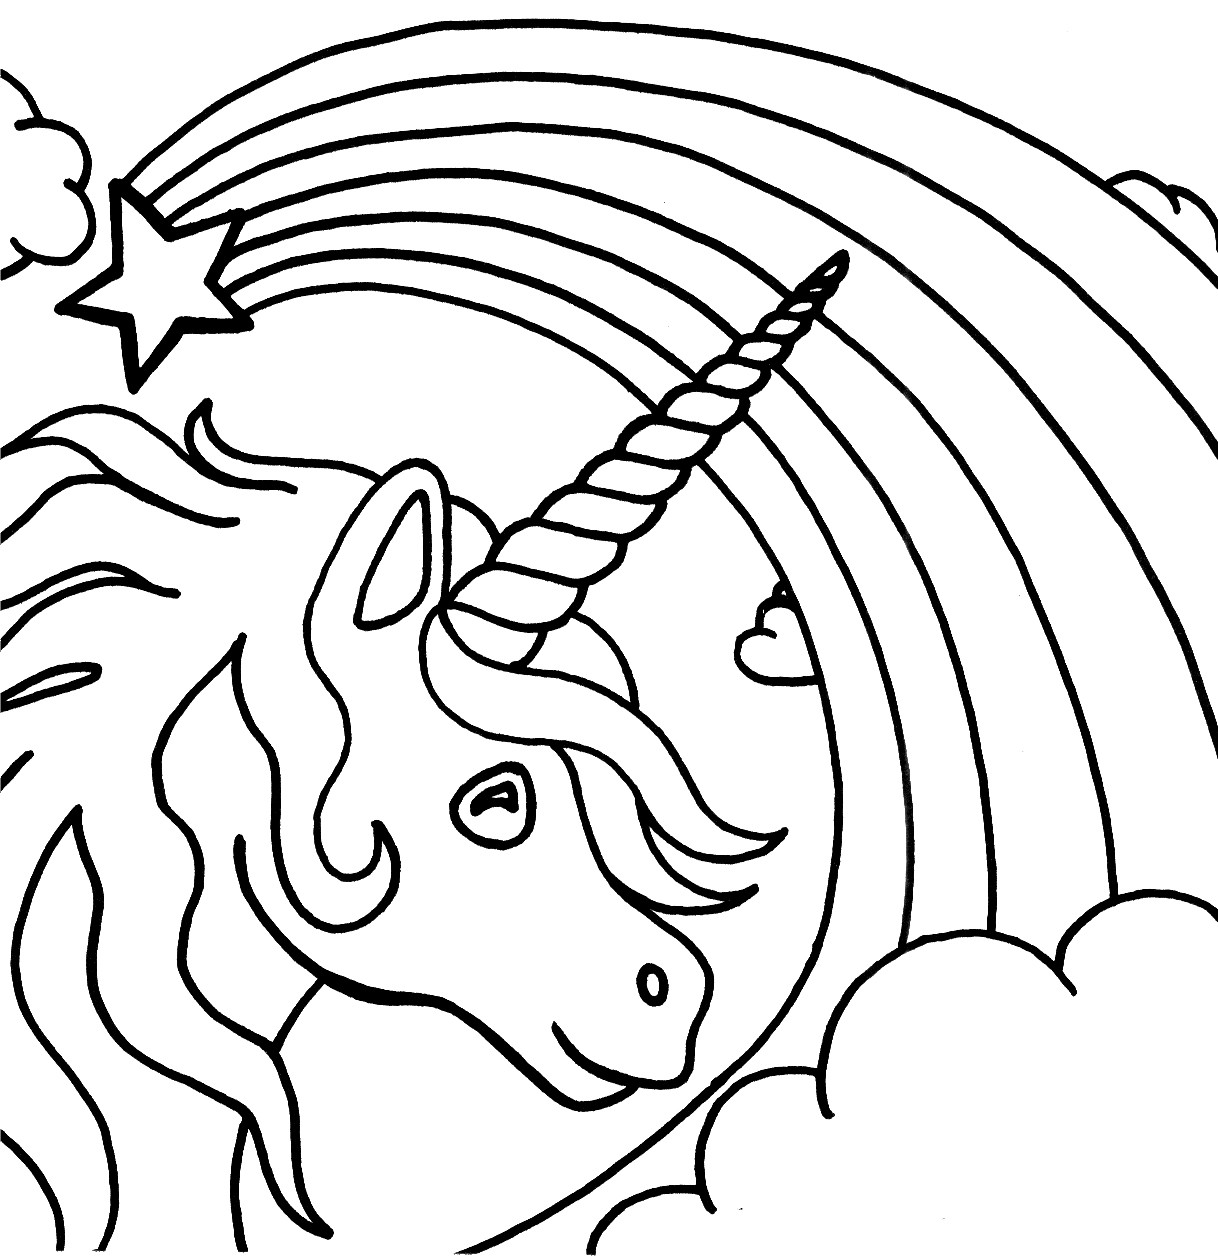 Artistic Coloring Sheets For Kids
 Unicorn To Color And Print The Art Jinni